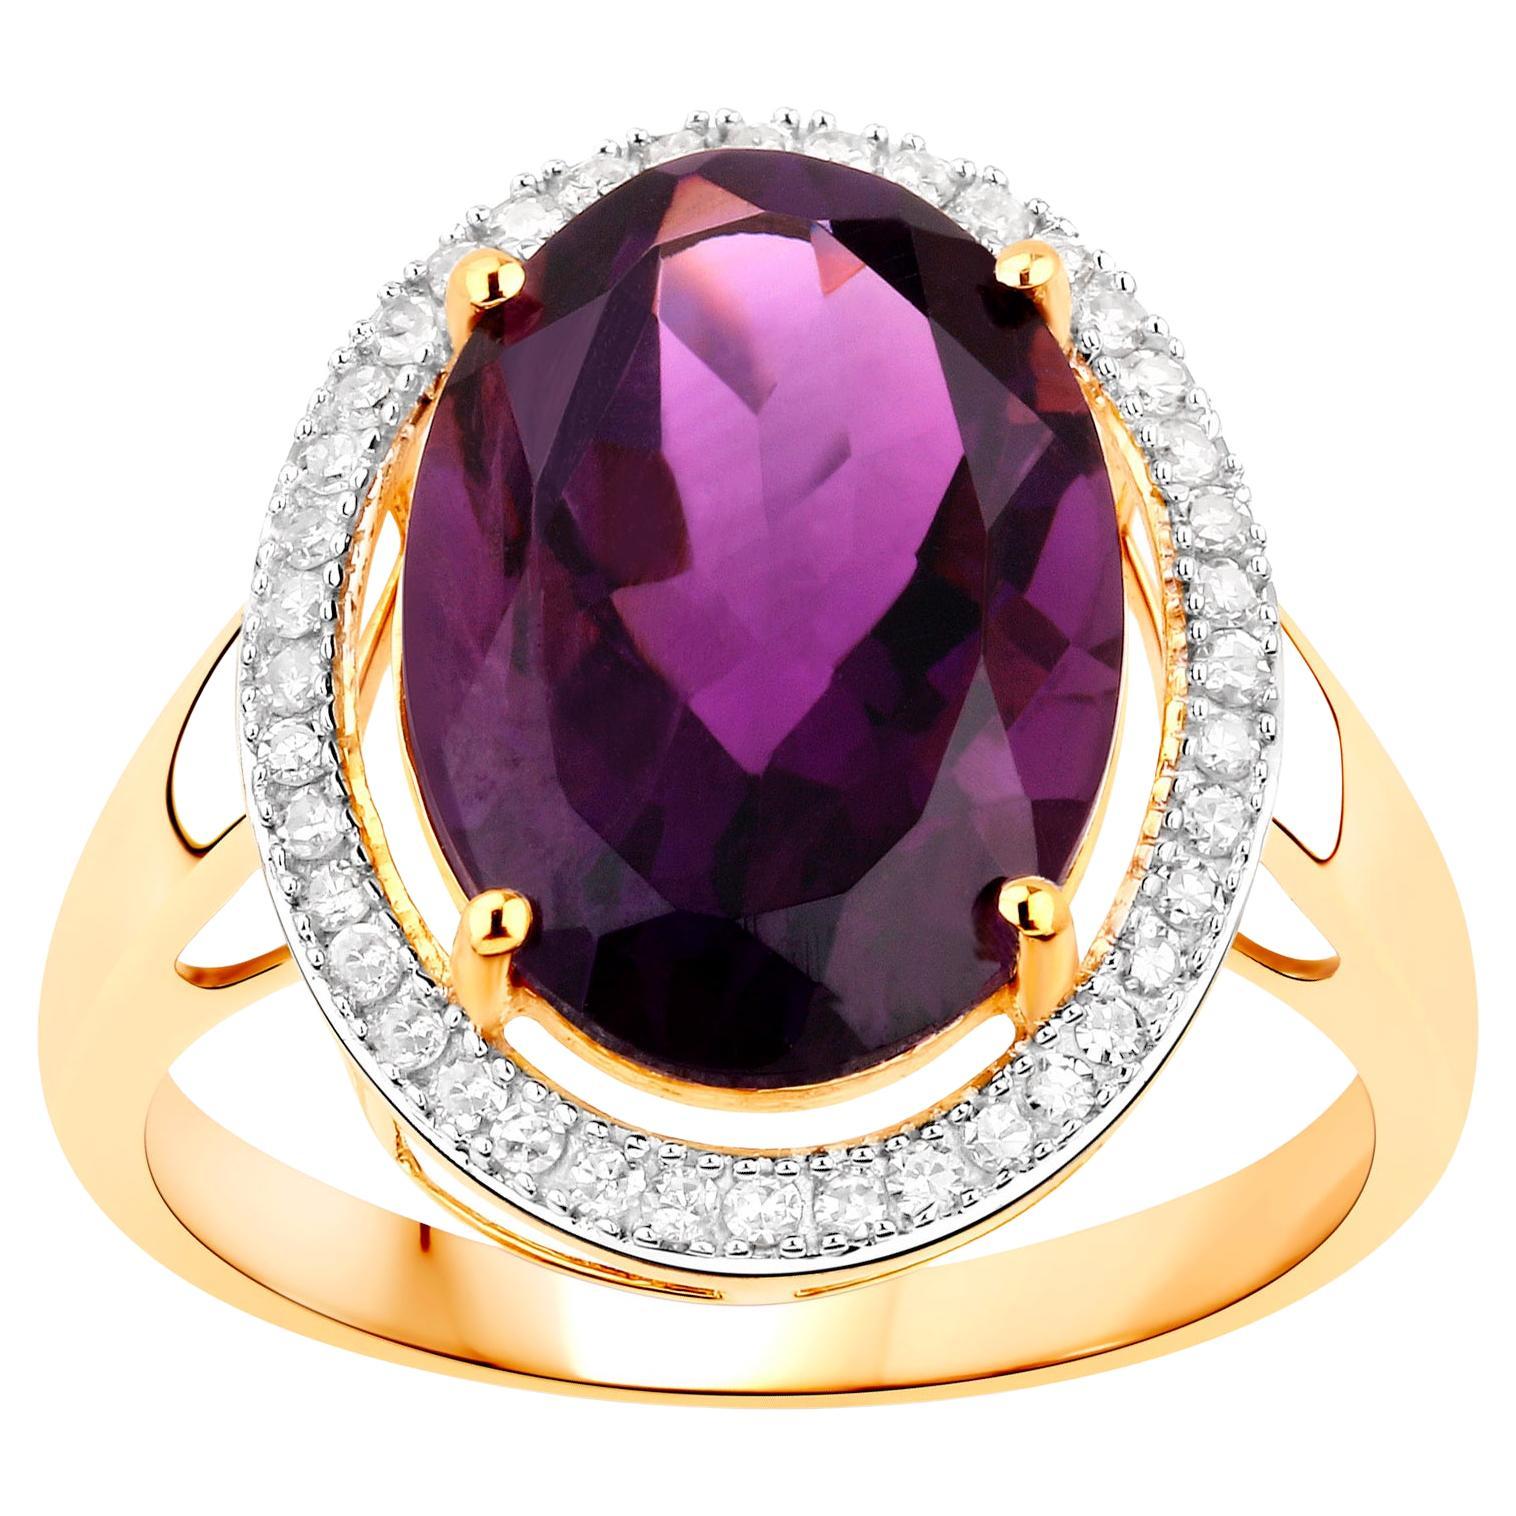 Amethyst Ring With Diamonds 5.21 Carats 14K Yellow Gold